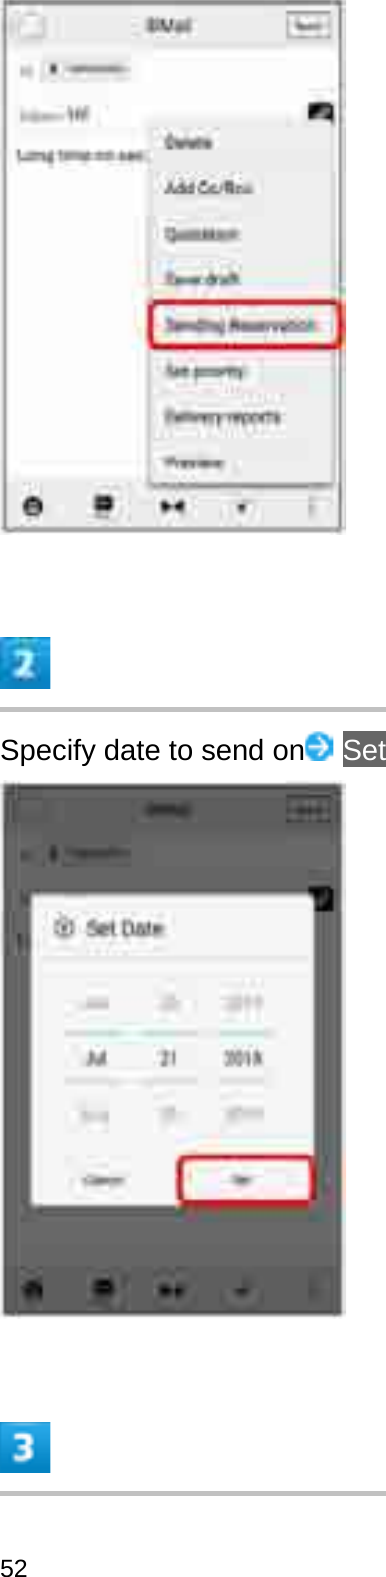 Specify date to send on Set52